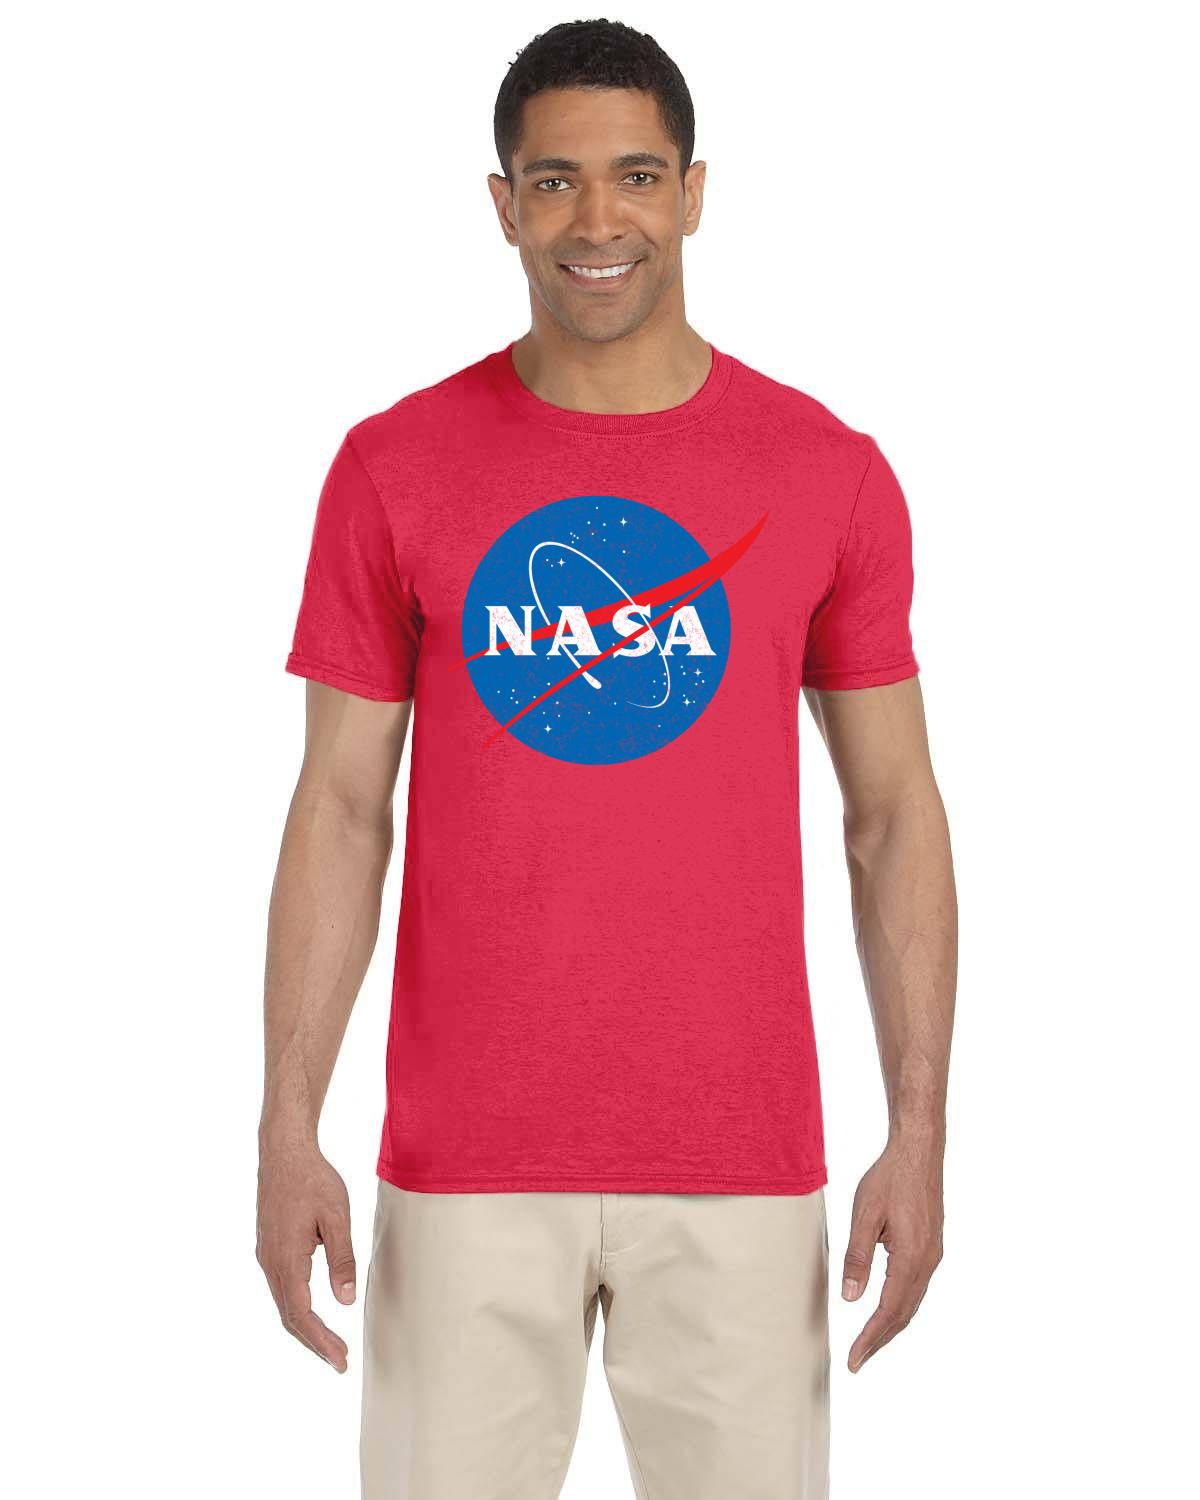 NASA Meatball Distressed Logo Men's T-Shirt: Official Space Agency Graphic Tee